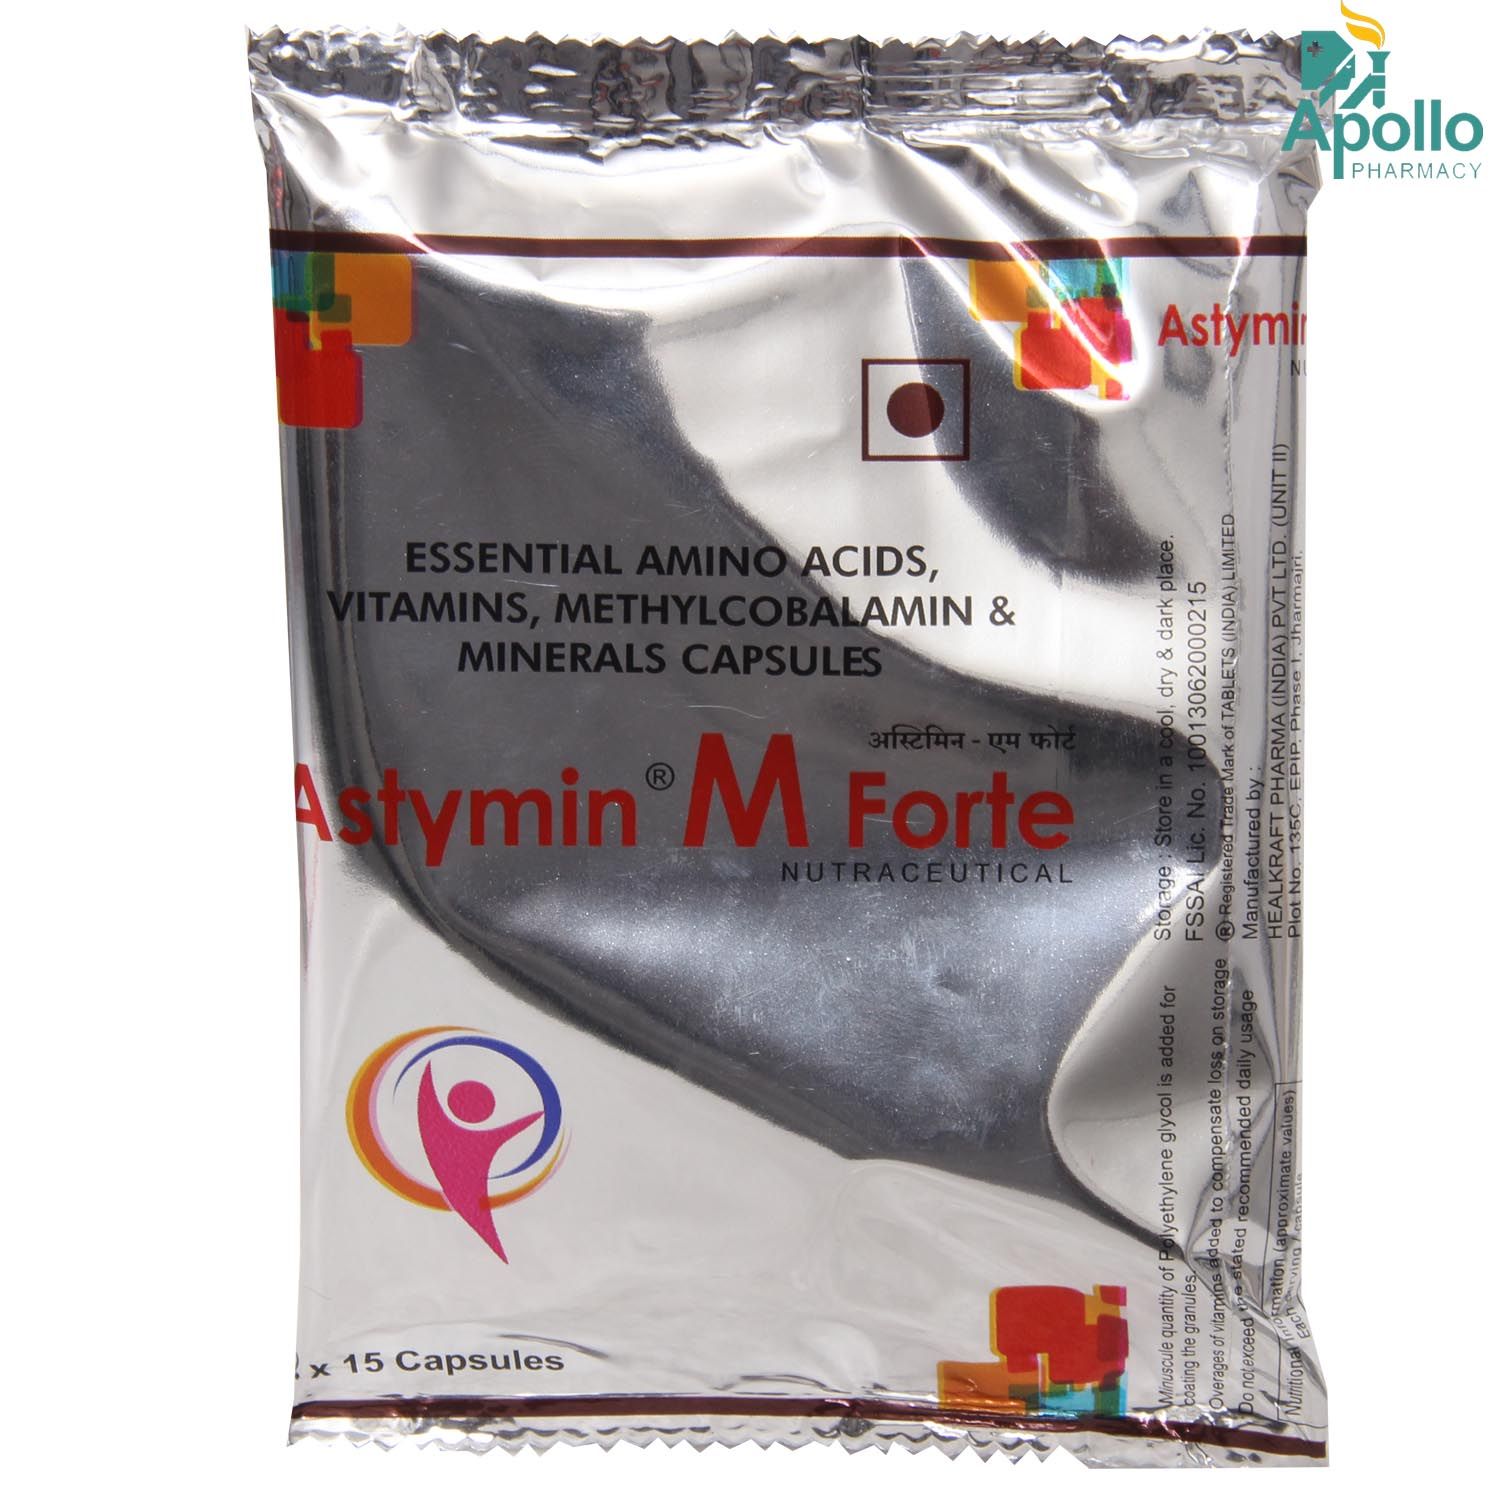 Astymin M Forte Capsule 30's, Pack of 30 S